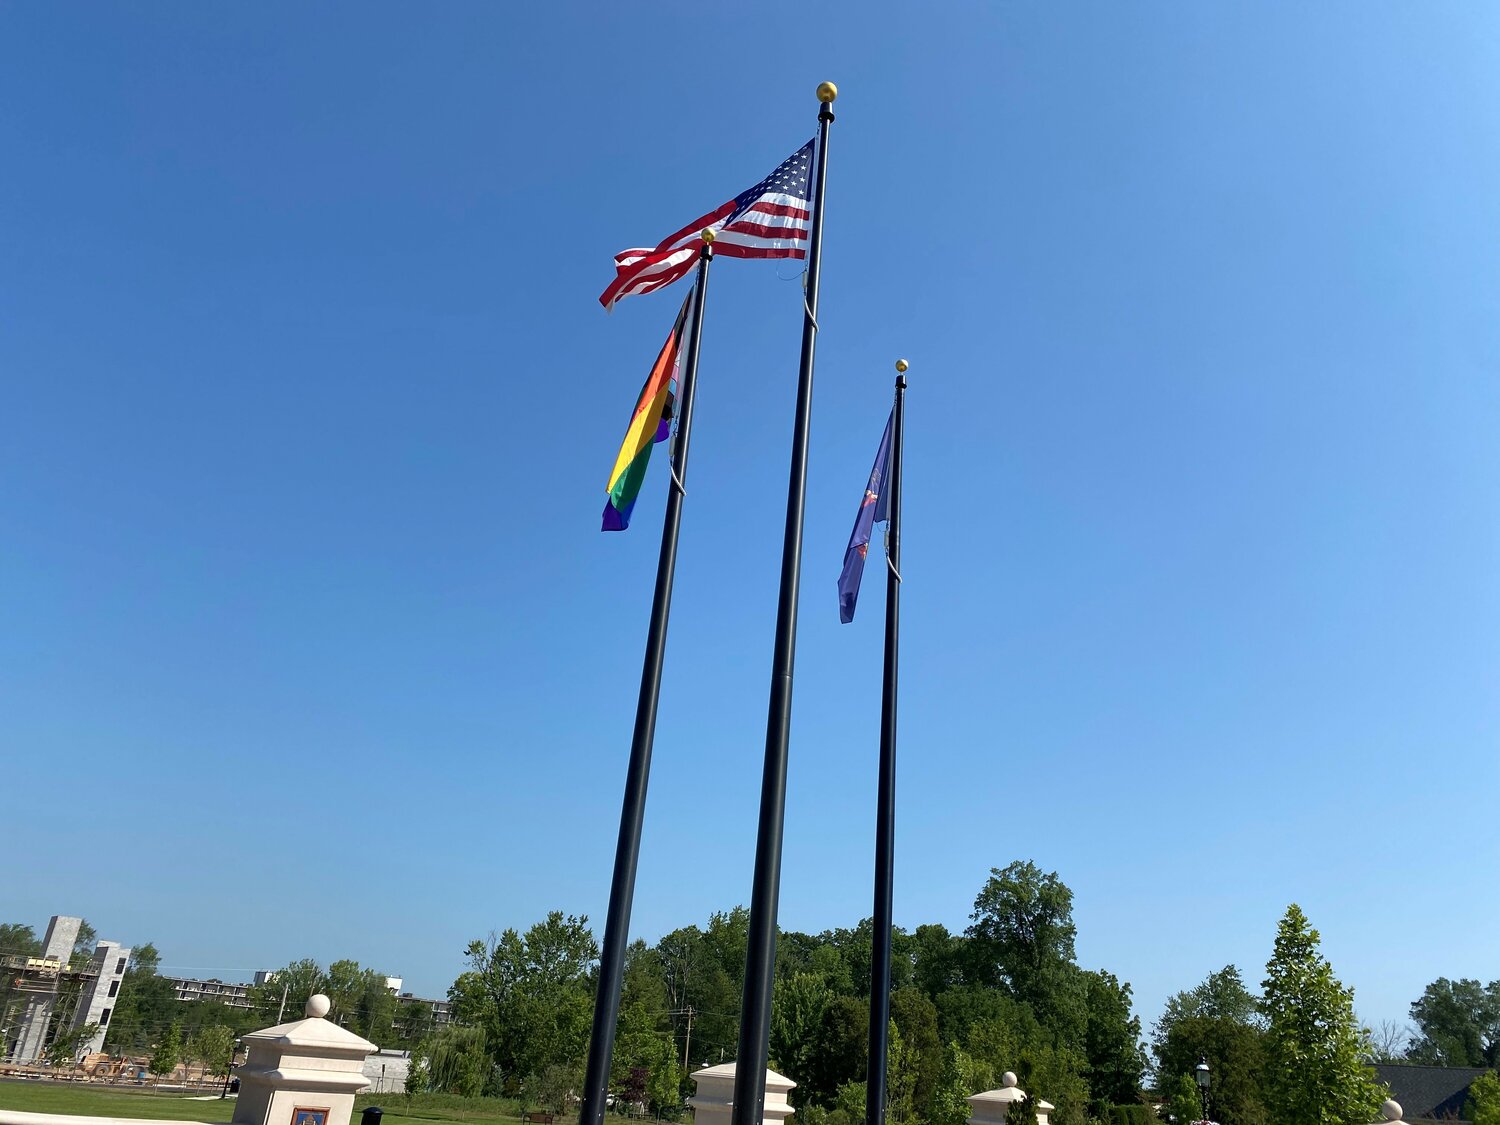 Following the flag-raising event at the county administration building, a second Pride flag was raised at Broad Commons Park, also in Doylestown Borough.